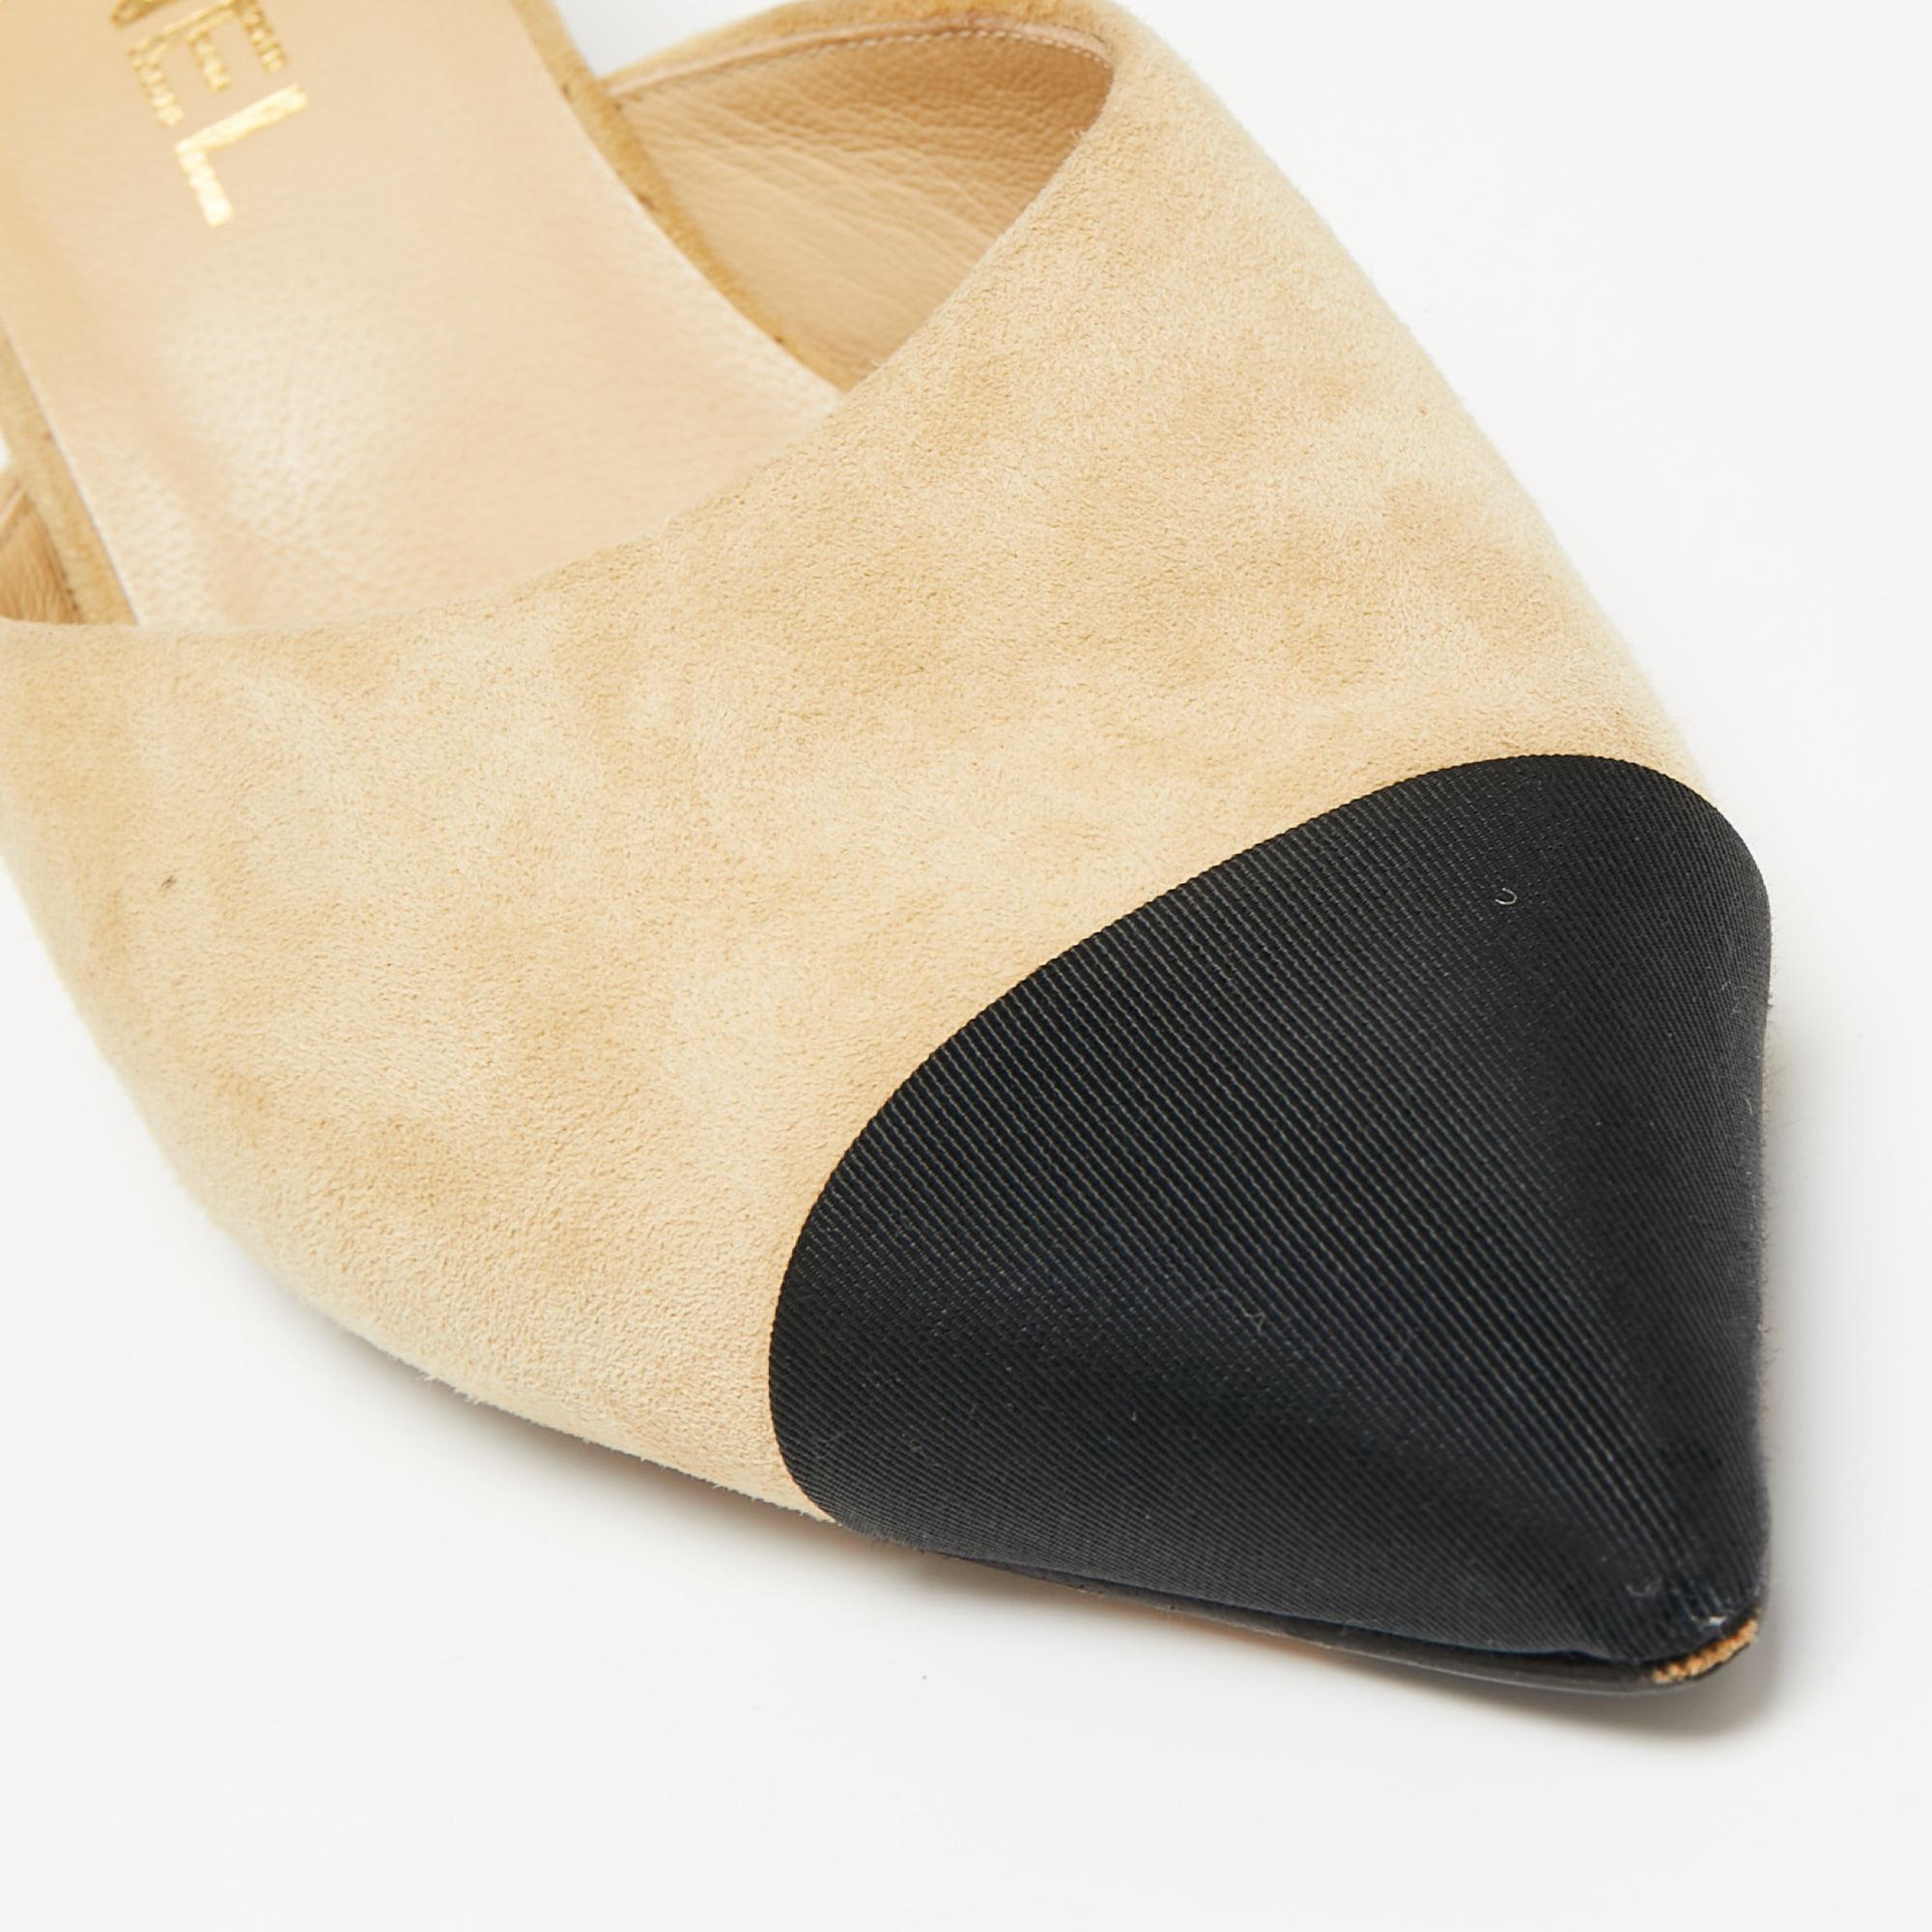 Chanel Beige/Black Suede And Canvas Mule Sandals Size 38 5